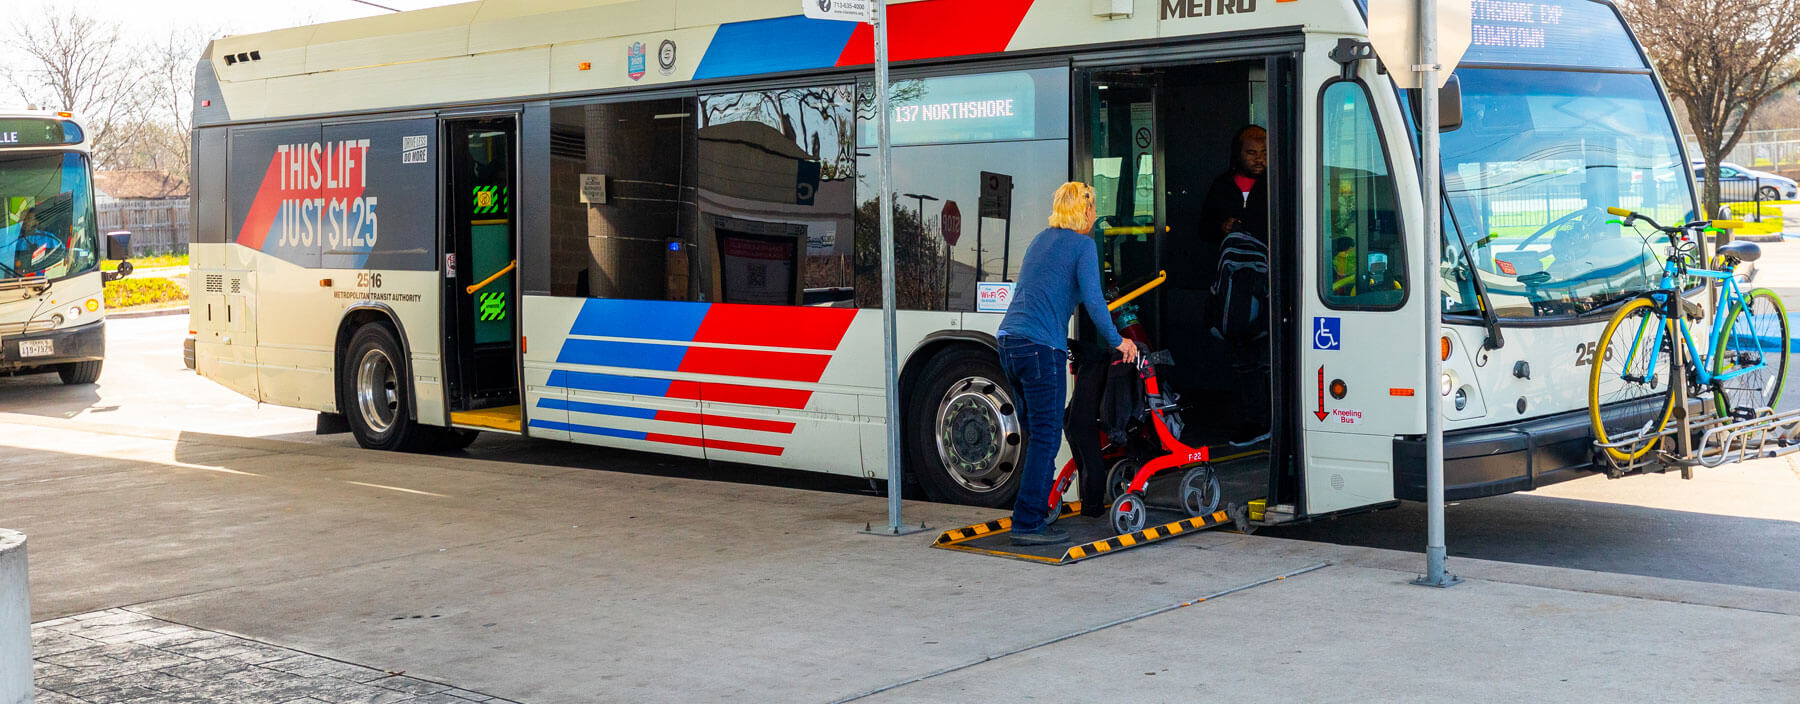 Rider with walker boarding a local METRO bus.